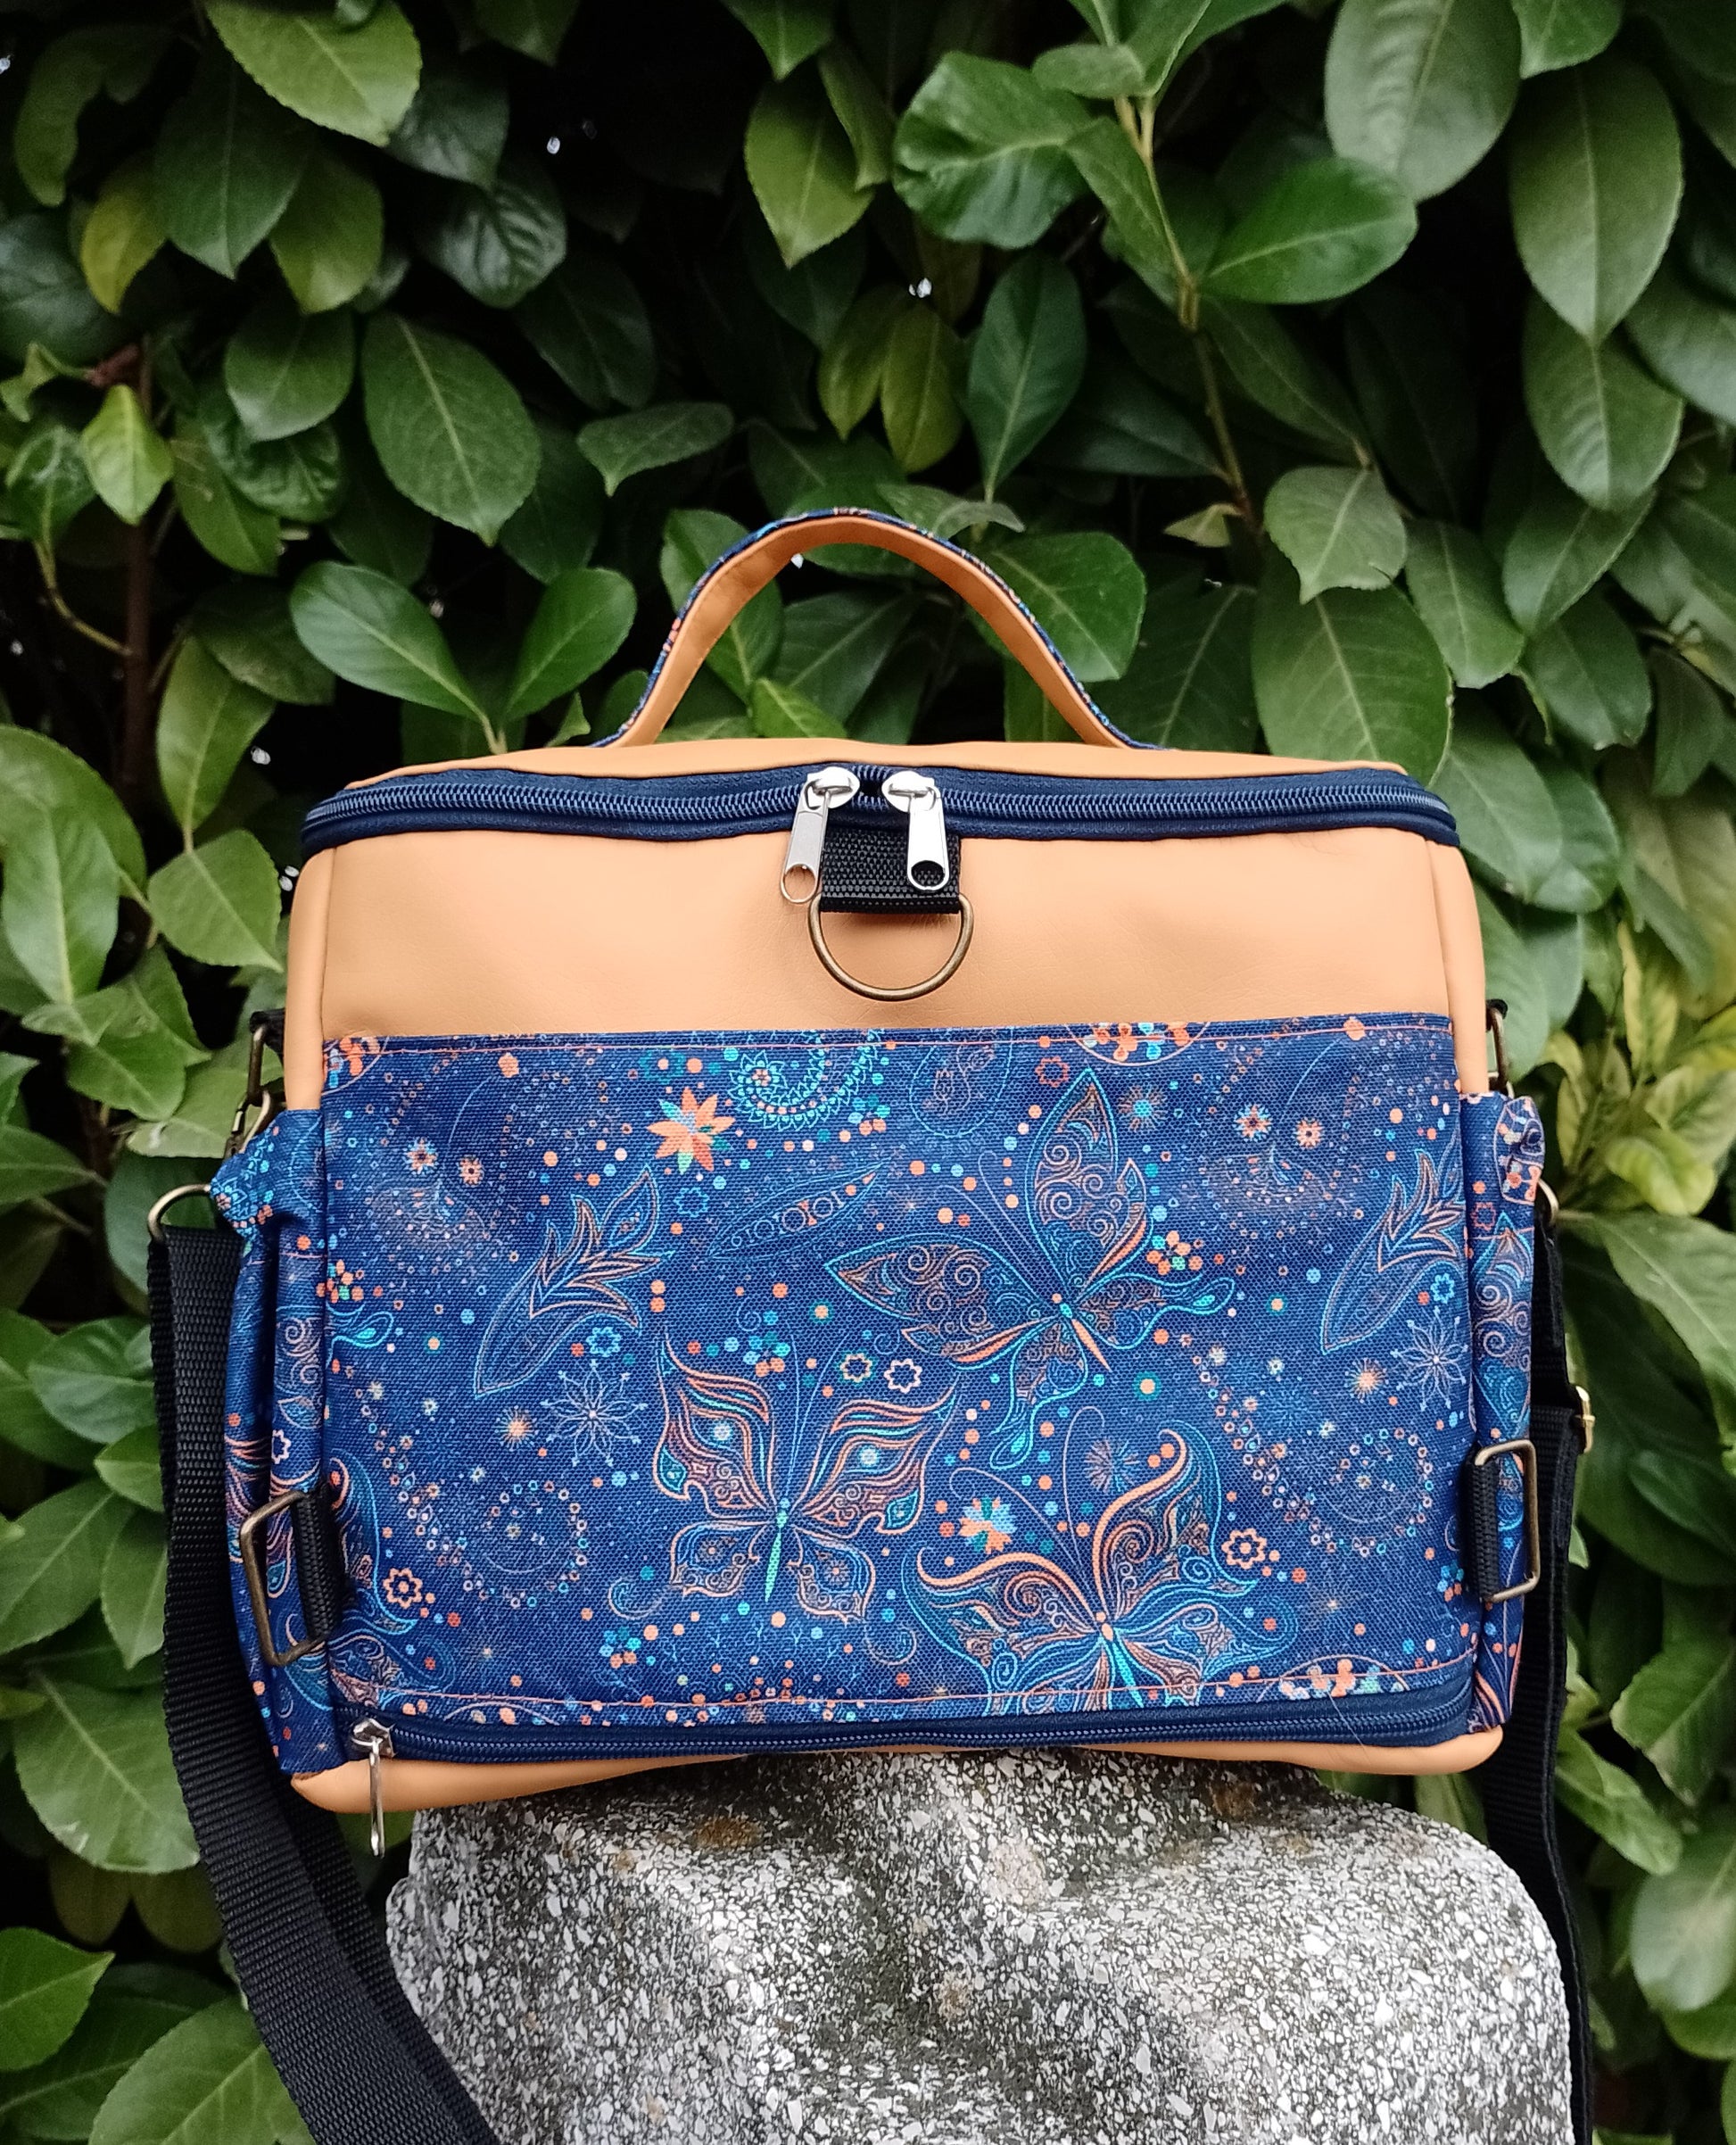 Anti Pickpocket Bag: FREE pattern, tutorial, and video sew-along